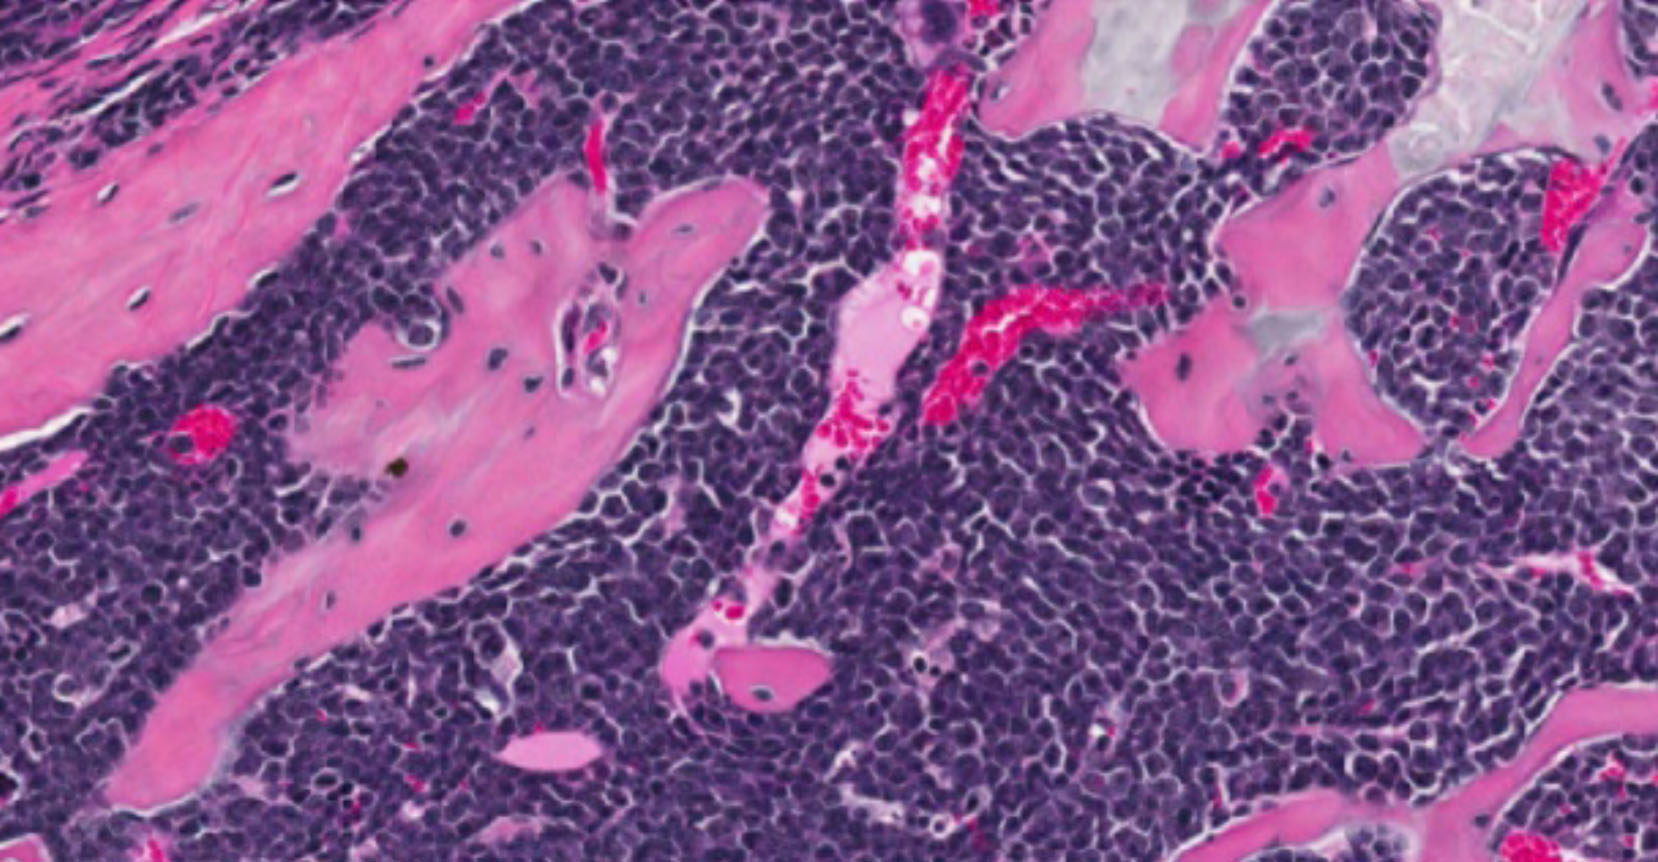 This figure shows dissemination of malignant T-ALL cells to the bone marrow of a Dlx5;Akt2 mouse that had aggressive disease that had spread to multiple organs. (Image Courtesy of Joseph R. Testa, PhD)